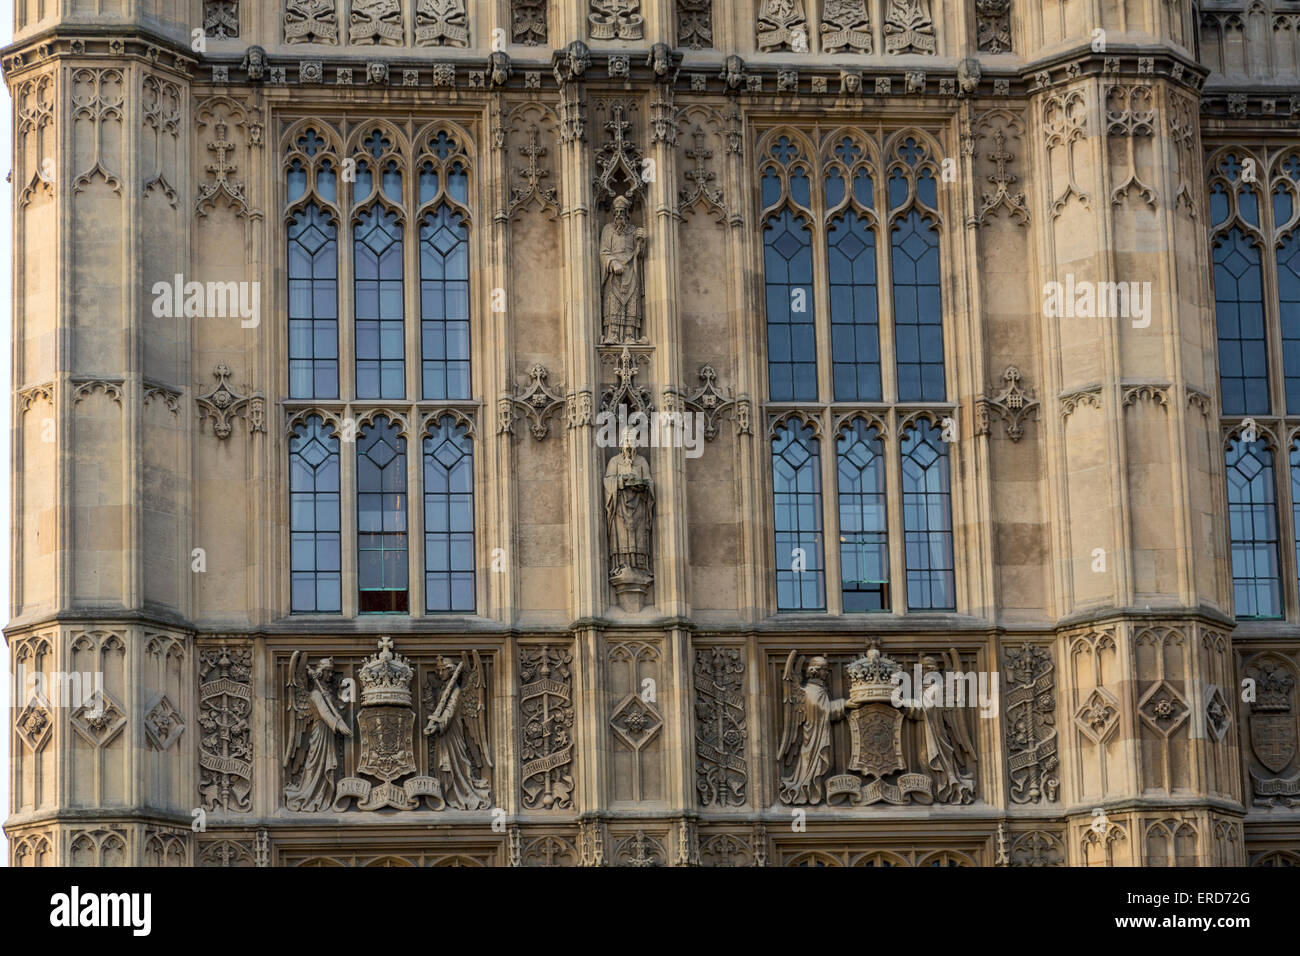 UK, England, London. Westminster Palace, Houses of Parliament, Stone Carvings of Figures and Heraldry. Stock Photo